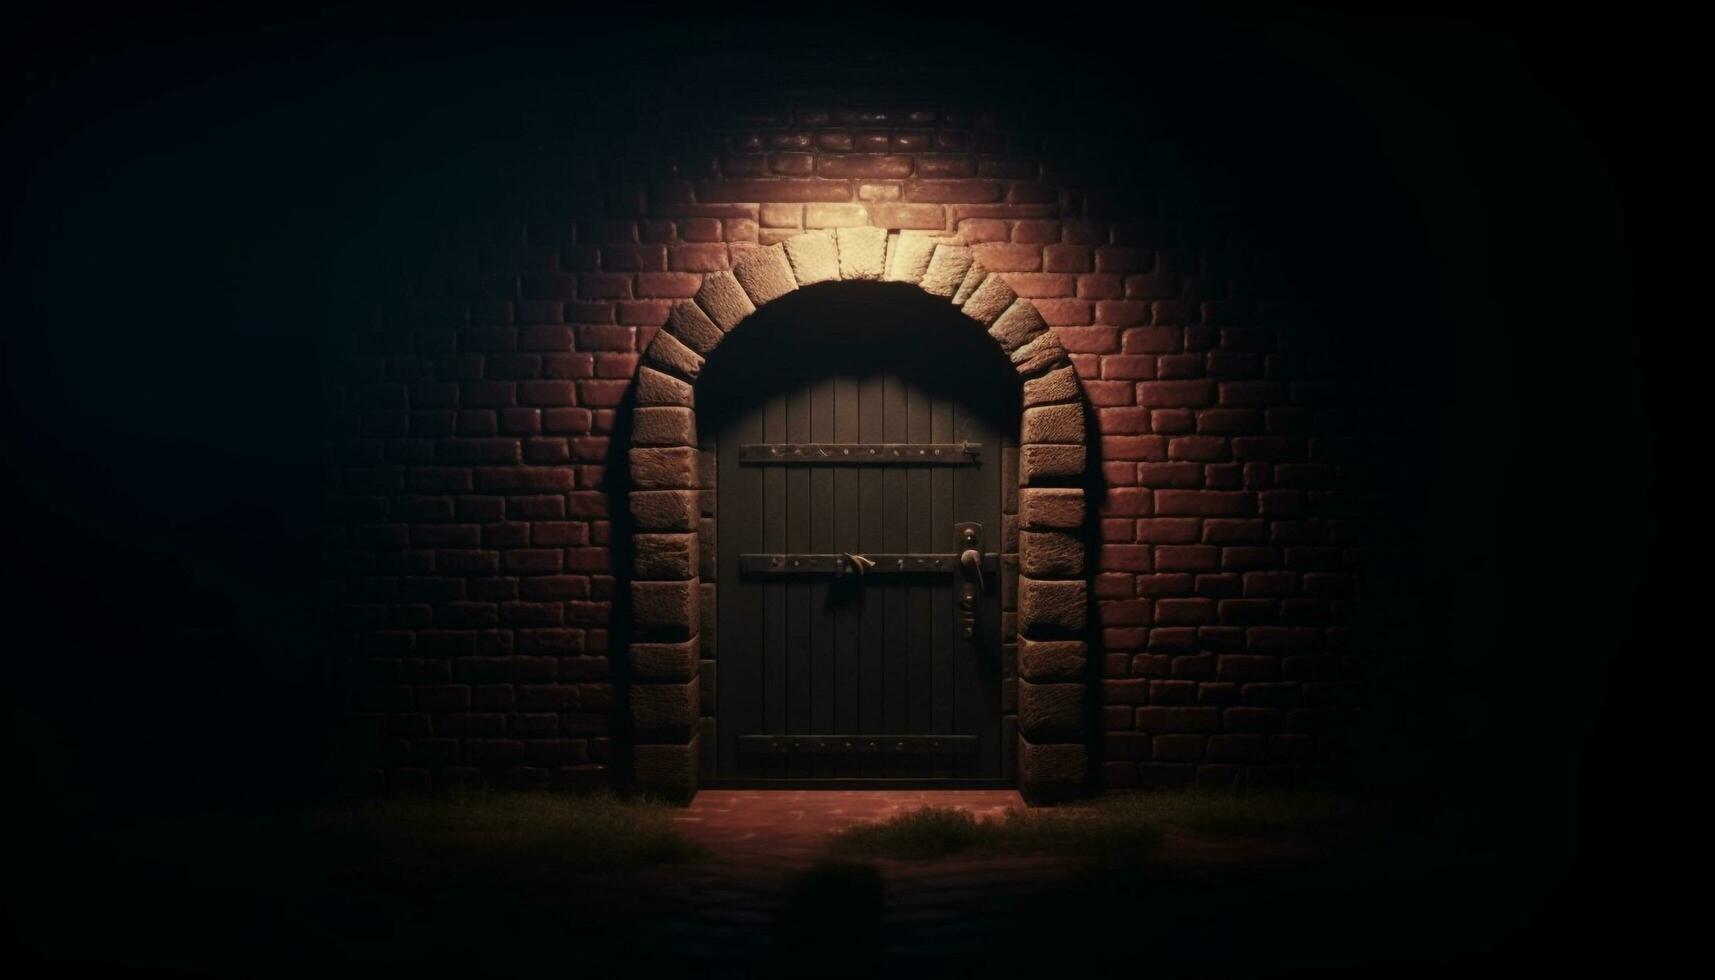 Spooky old doorway leads to abandoned dungeon with rusty arch generated by AI photo